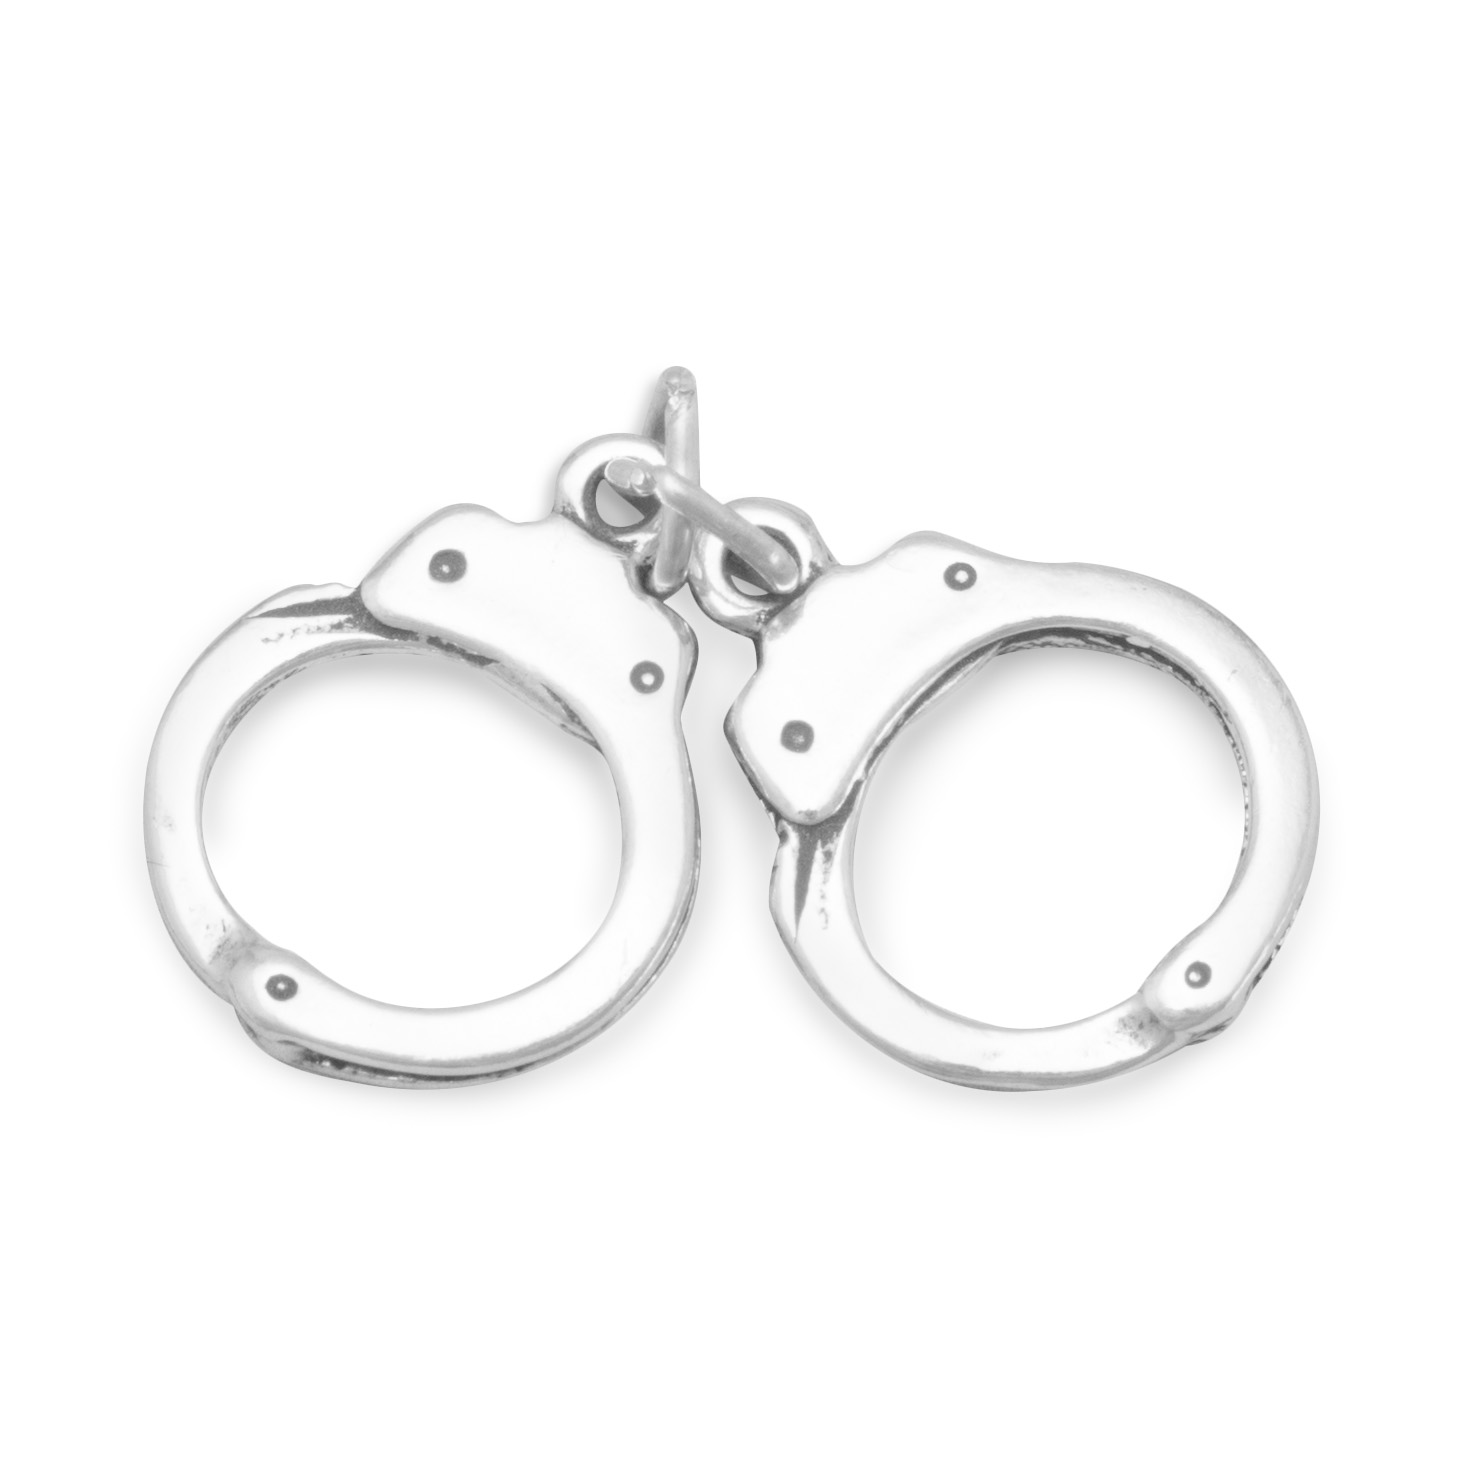 Silver Handcuffs Free PNG Image